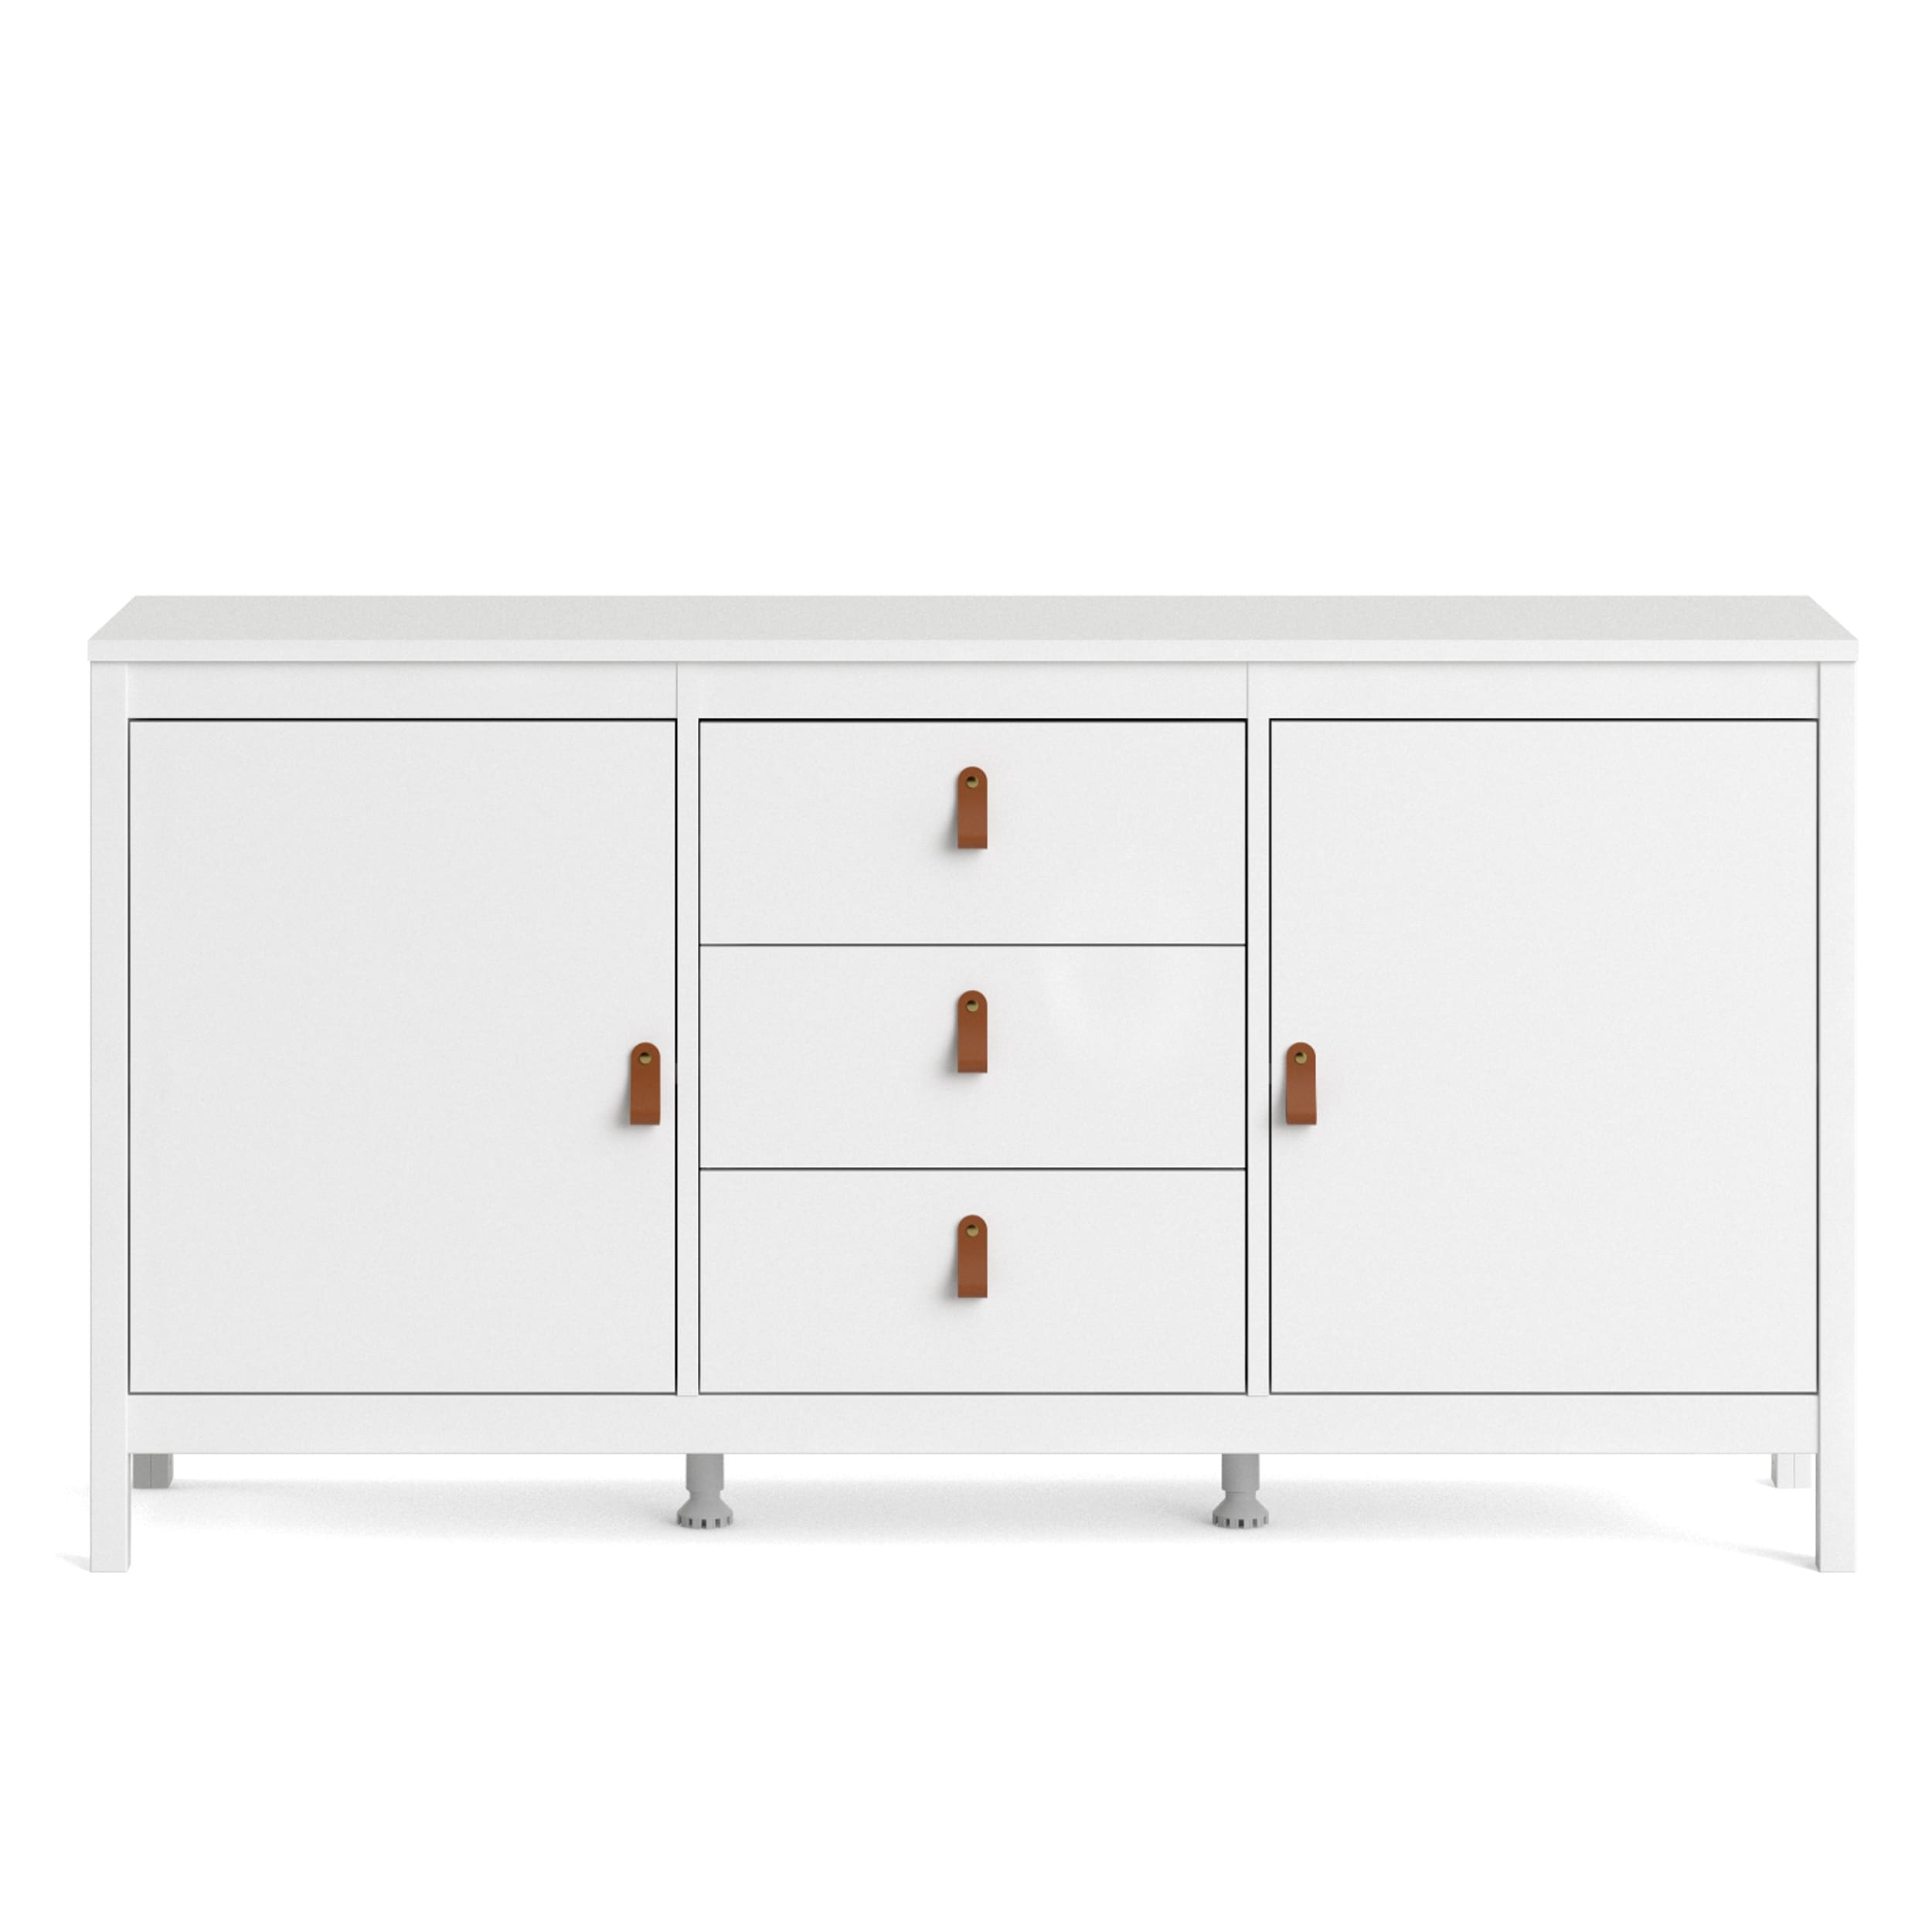 & Sideboard On Madrid Bath with Beyond Sale 3-Drawers & 33673465 - - 2-Door Porch Den - Bed